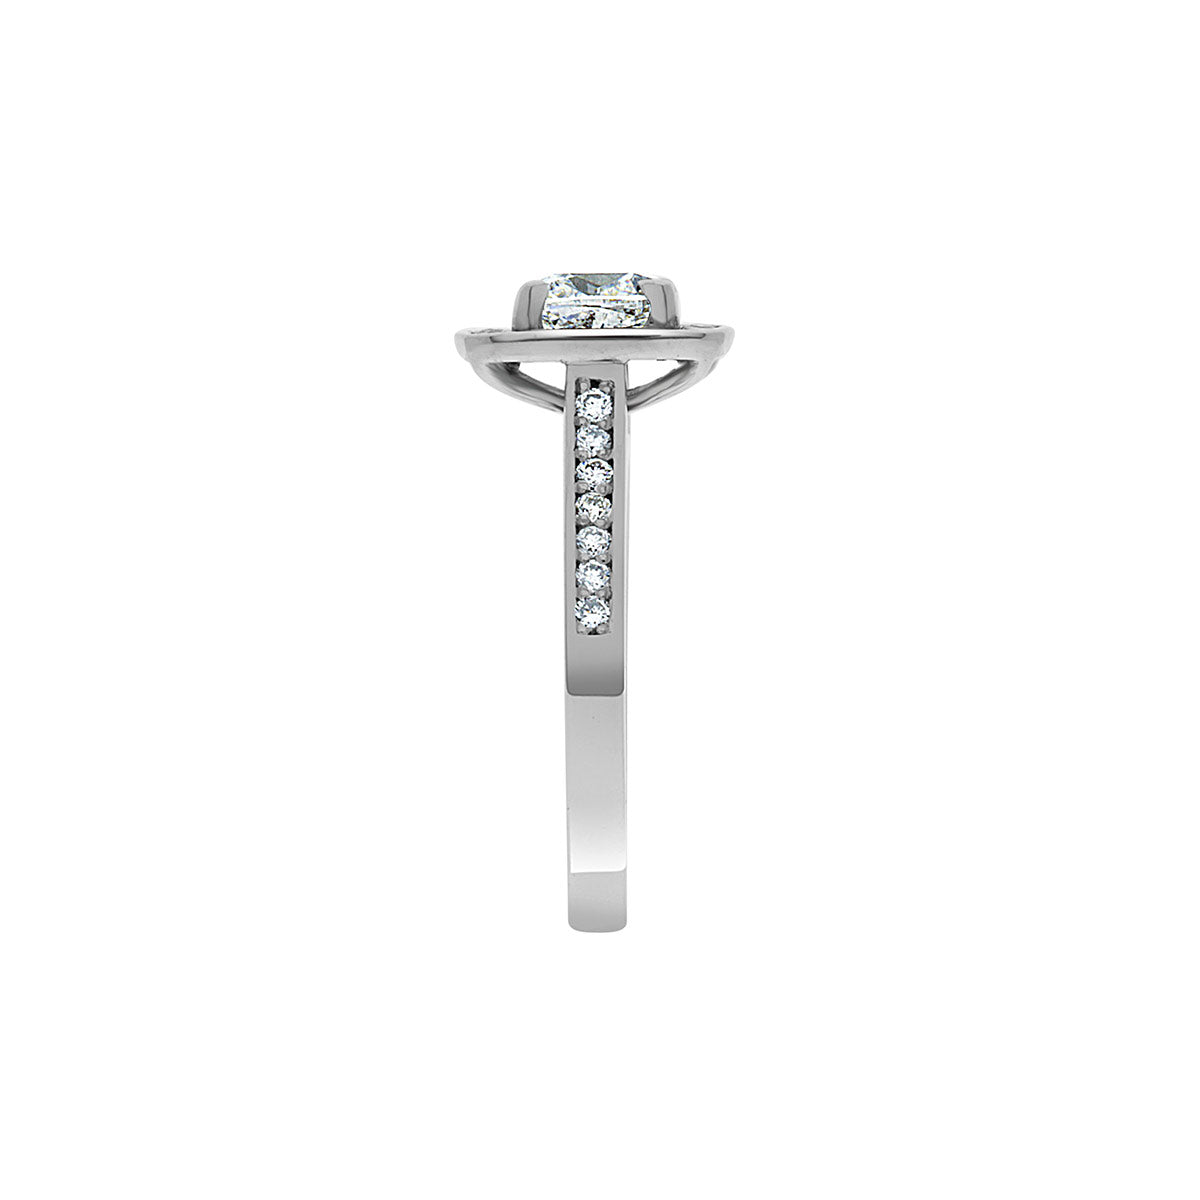 Cushion Cut Diamond Ring in white gold upright and viewed from the side